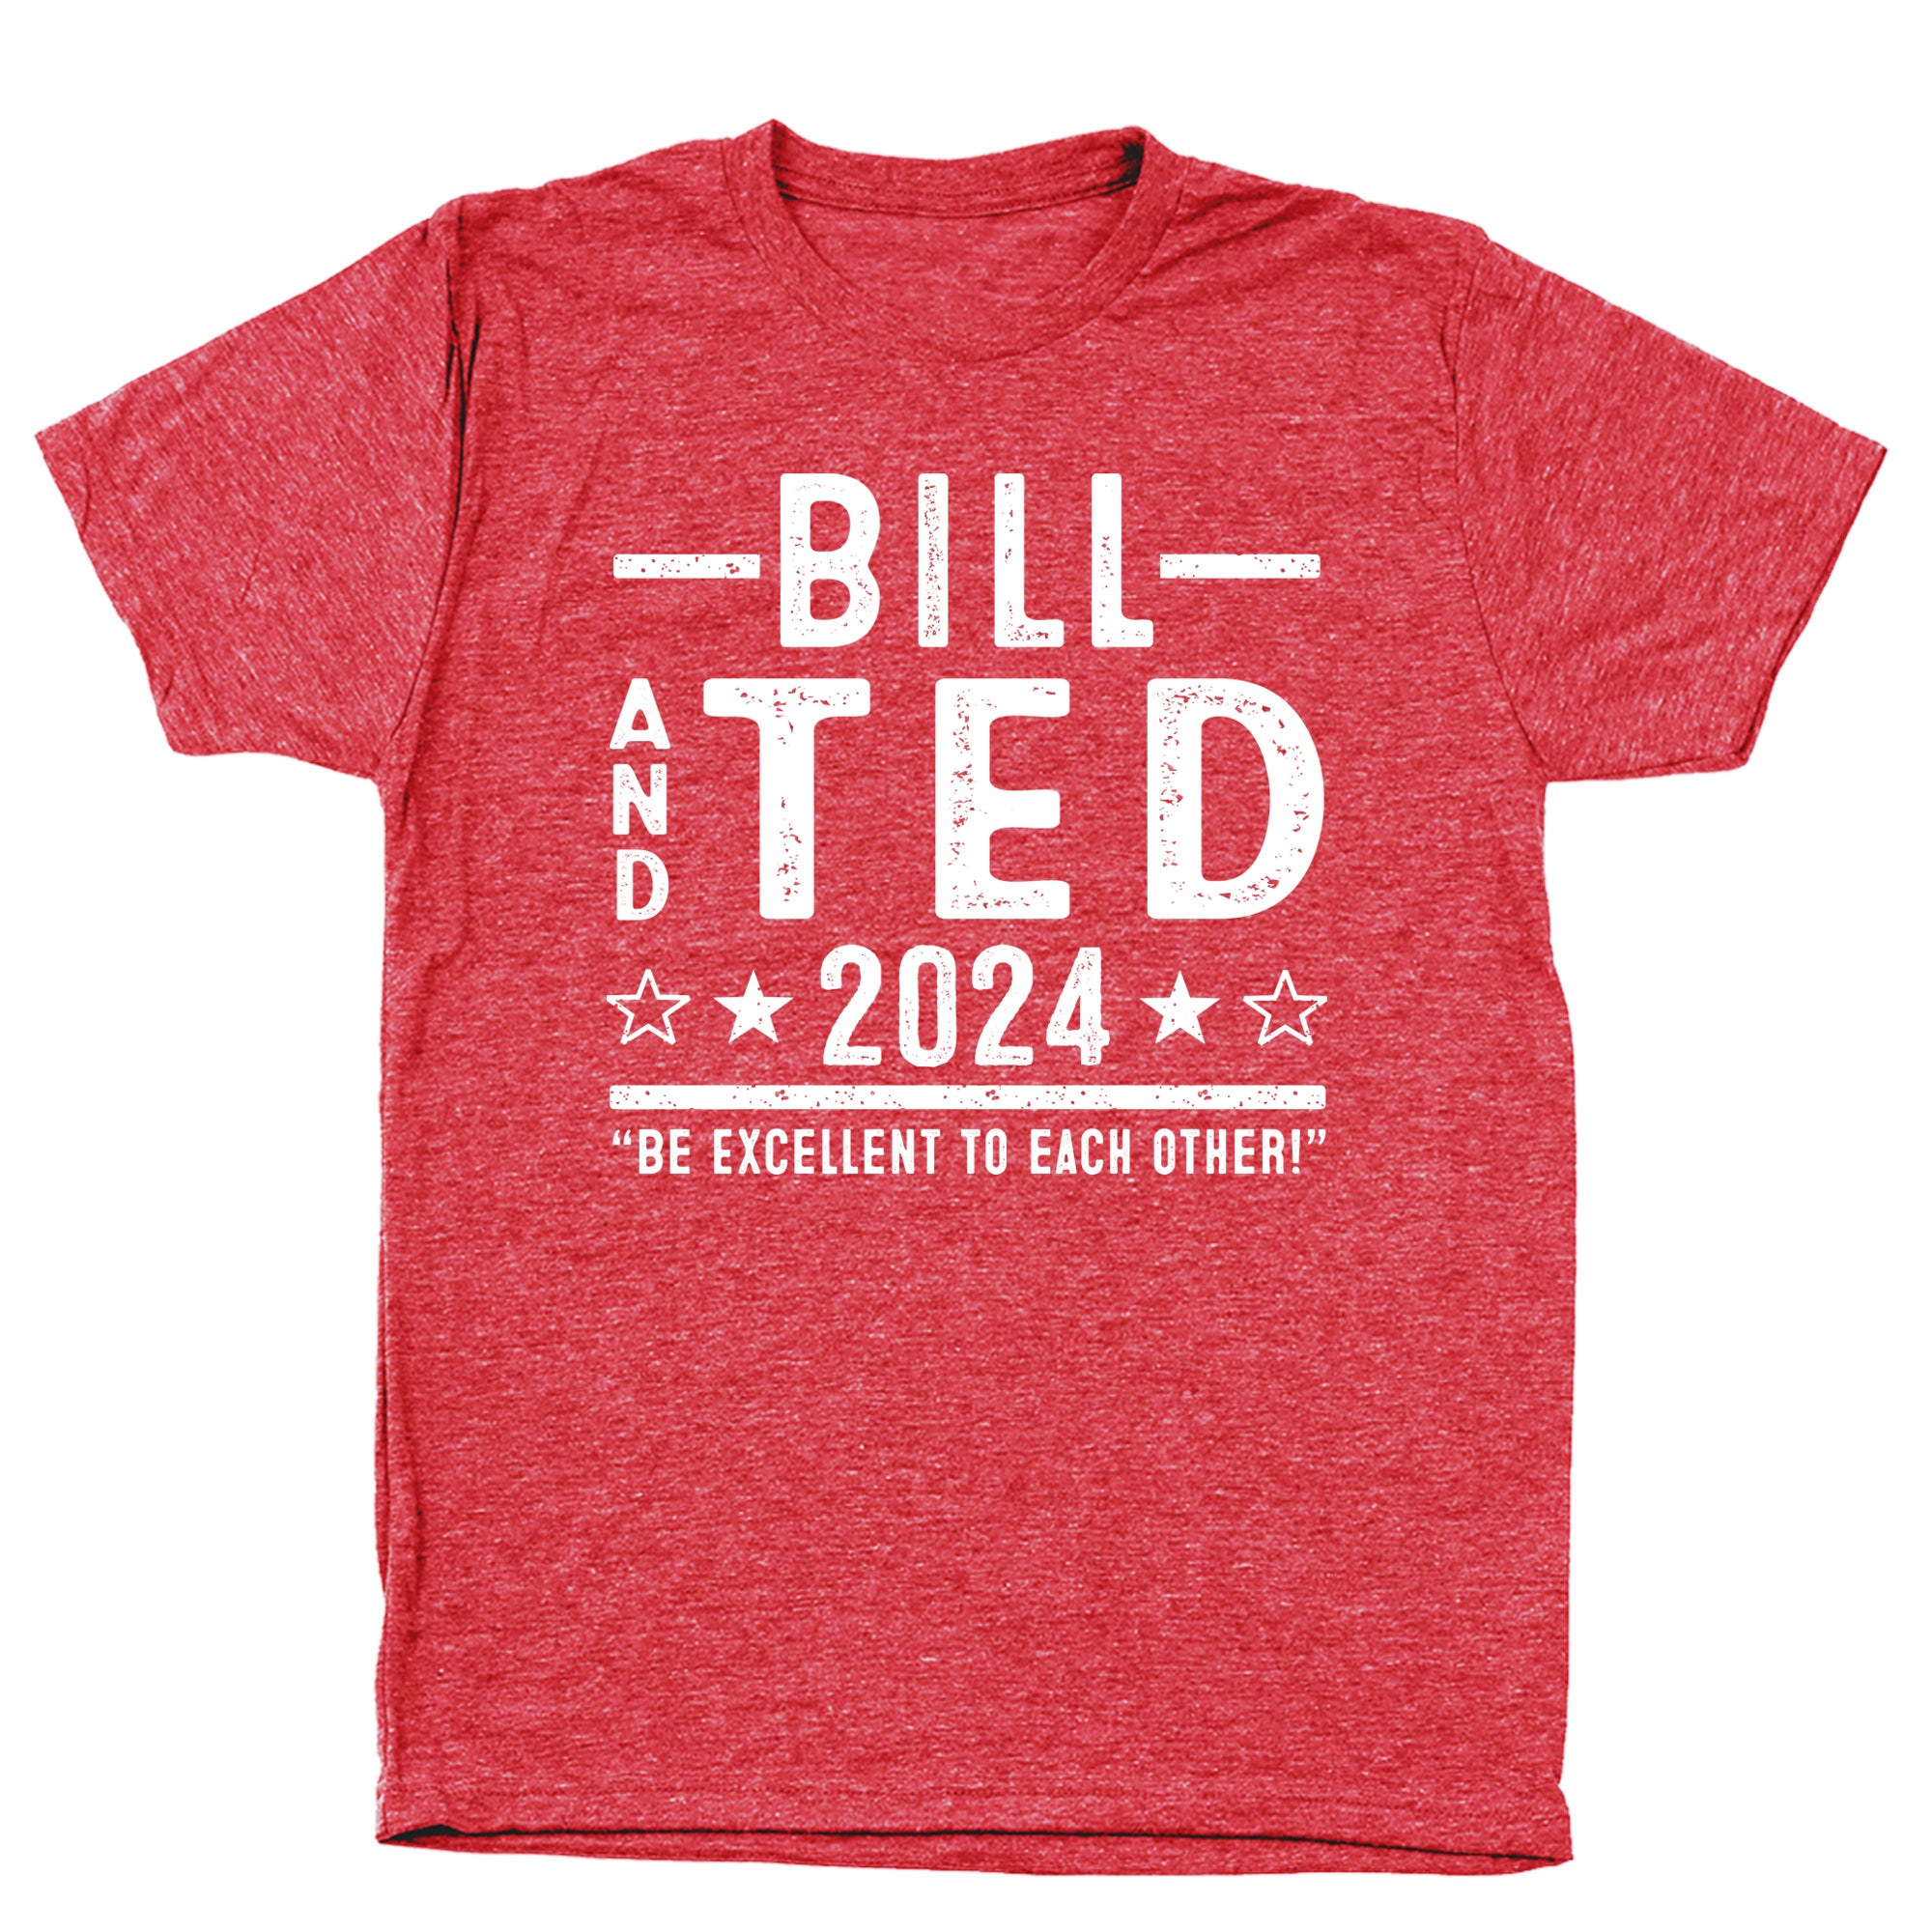 Bill and Ted 2024 Election Tshirt - Donkey Tees